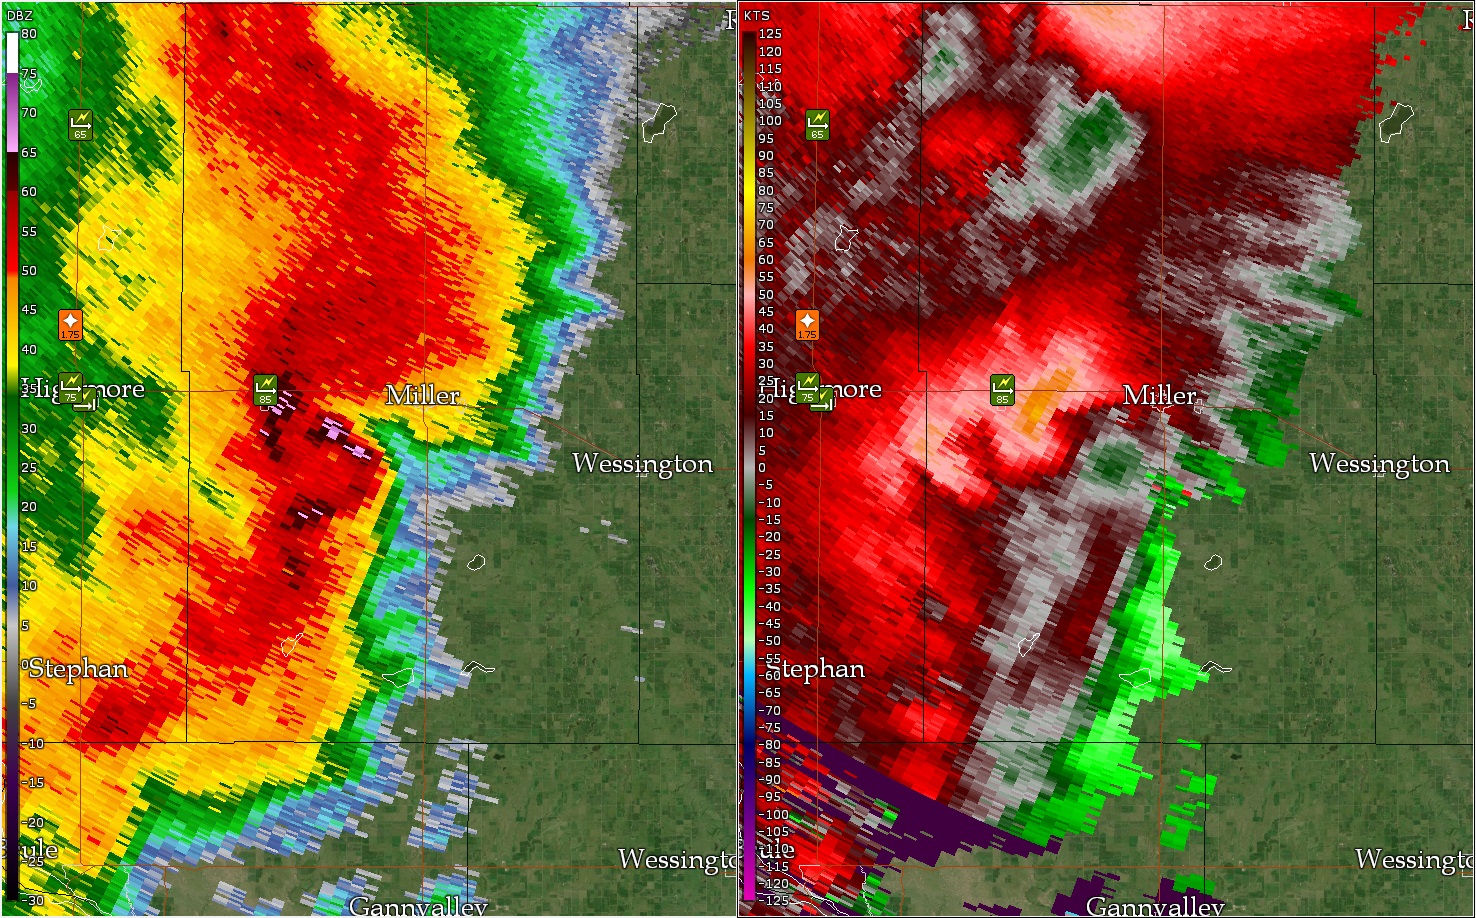 12:39 PM CDT radar Image as the storm was approaching Miller, SD.  The storm produced 87 mph winds in Ree Heights and tree damage through Miller, SD. Reflectivity is in the left panel and velocity in the right. 